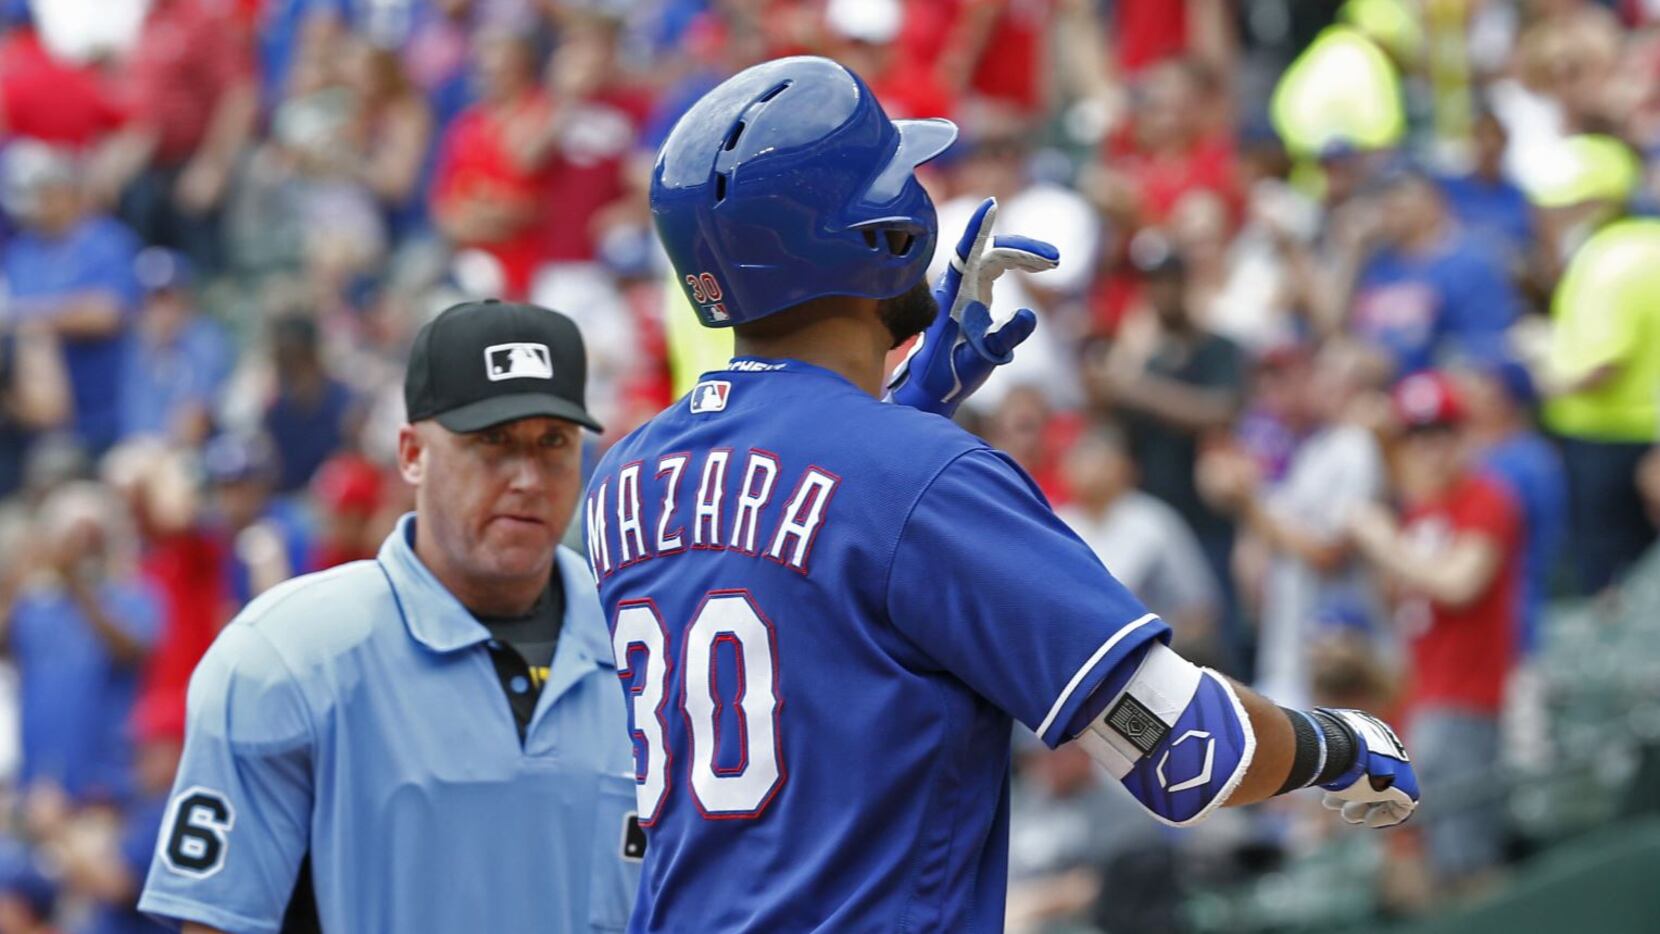 Fraley: Rangers' pitching staff faces major test in Angels